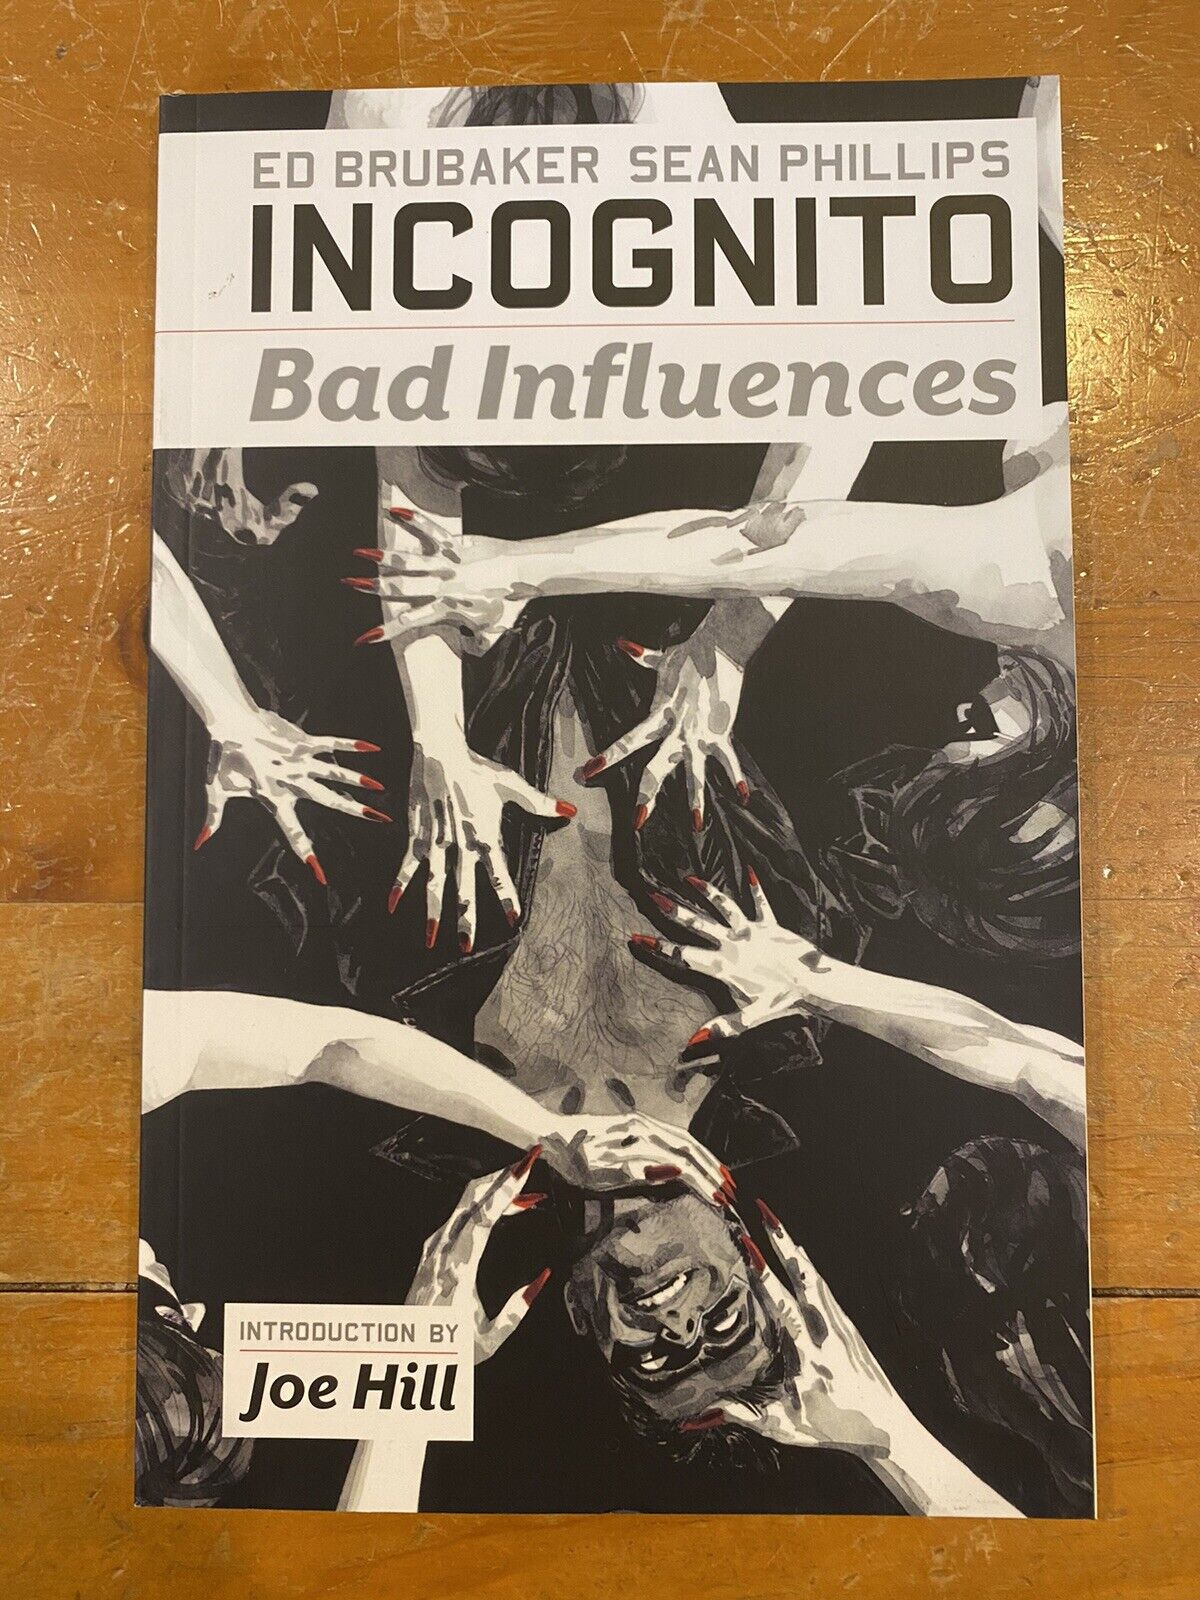 Incognito: Bad Influences (Marvel/Icon 2011) by Brubaker & Phillips